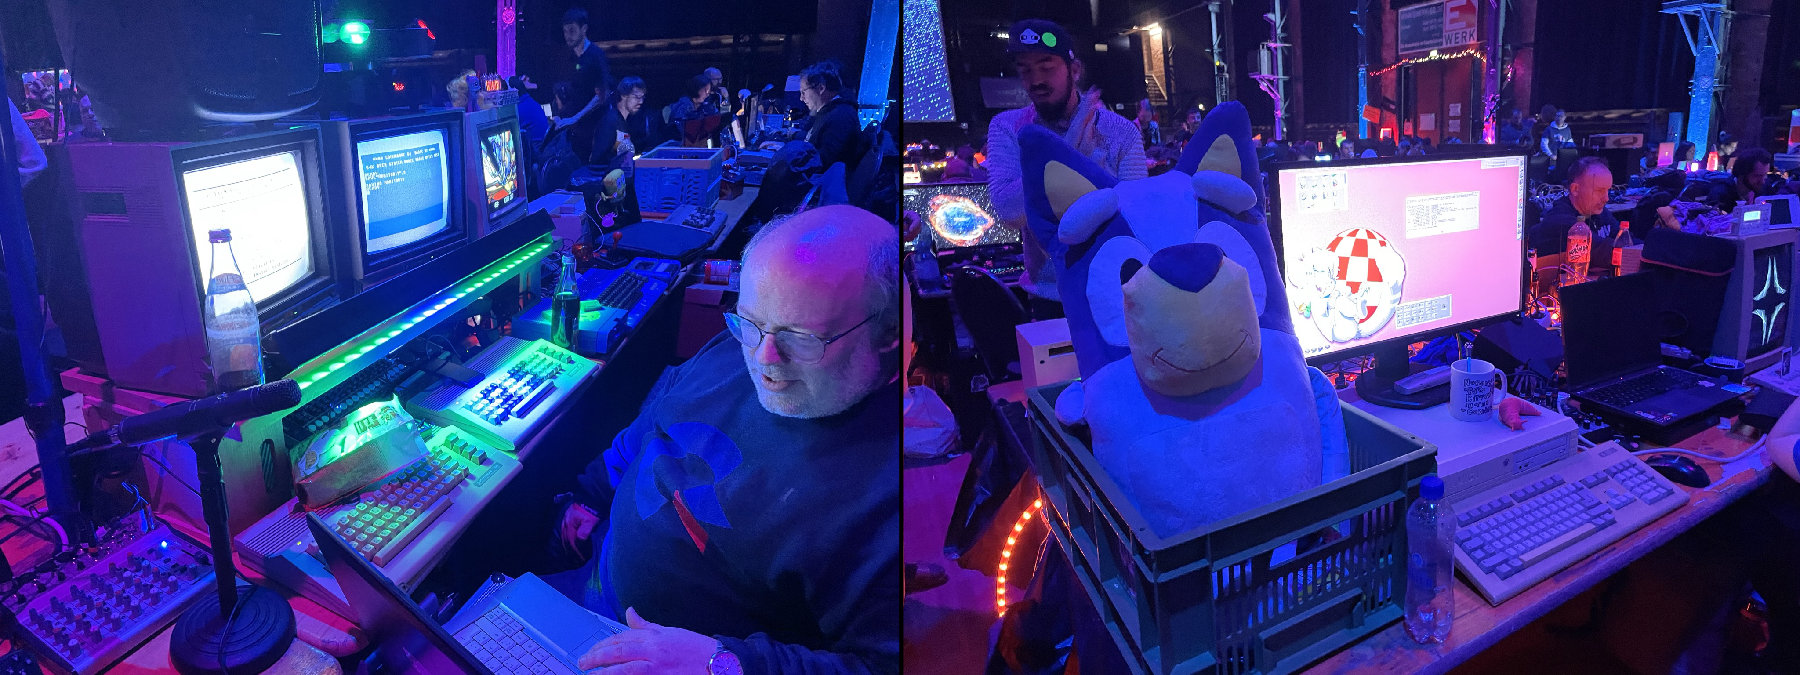 Just two example of the great tables of participants at Evoke 2023